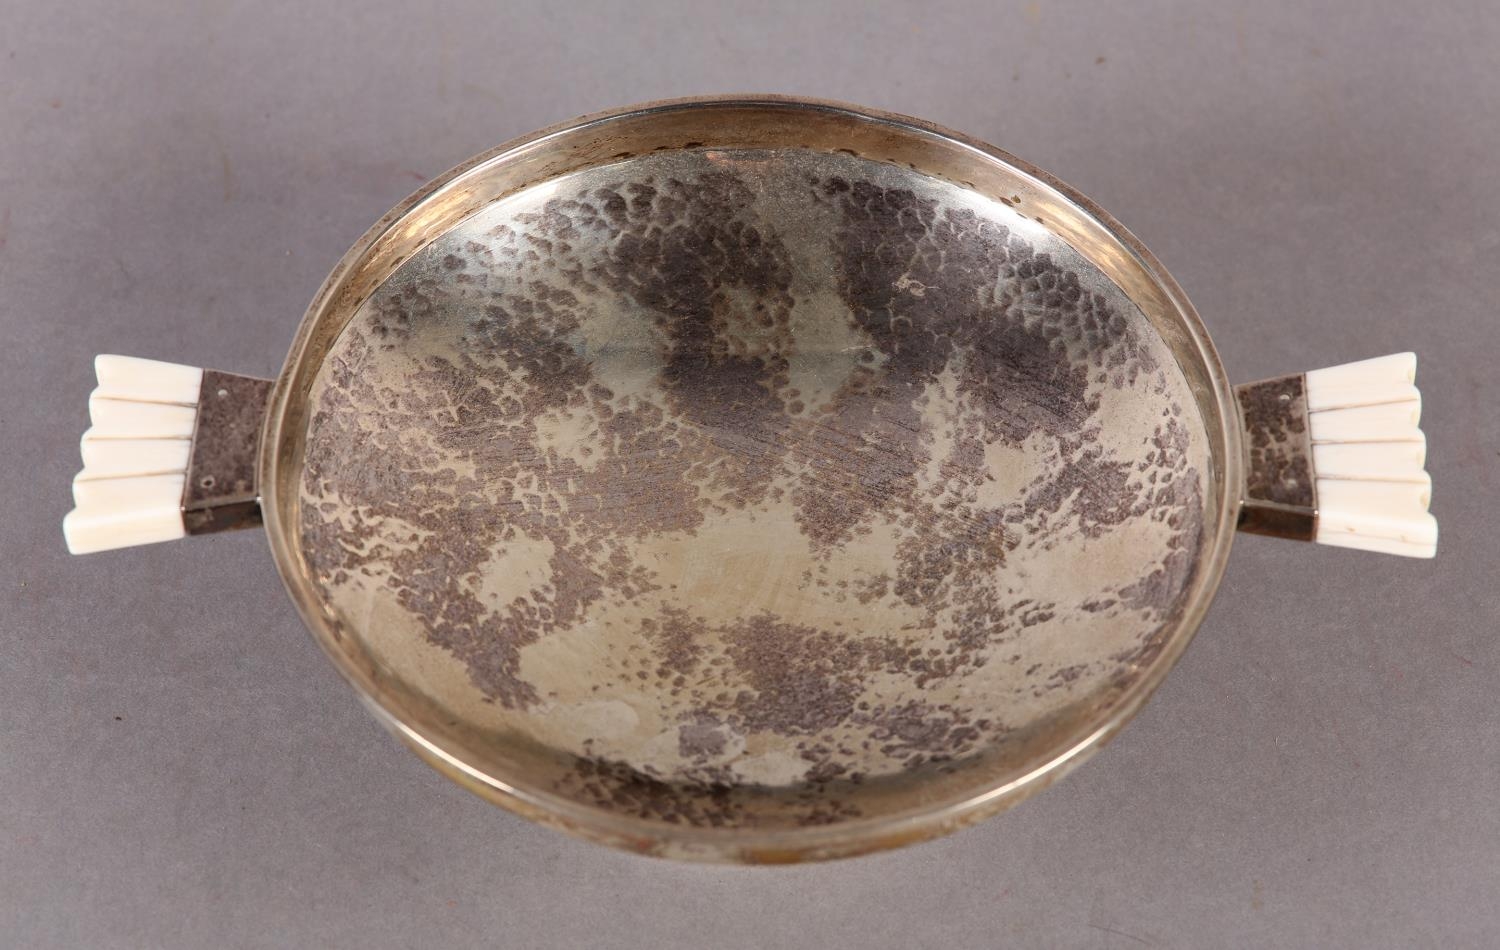 AN ART DECO SILVER AND IVORY HANDLED BOWL by Connell, 83 Cheapside, pattern no. 1213, planished, - Image 3 of 4